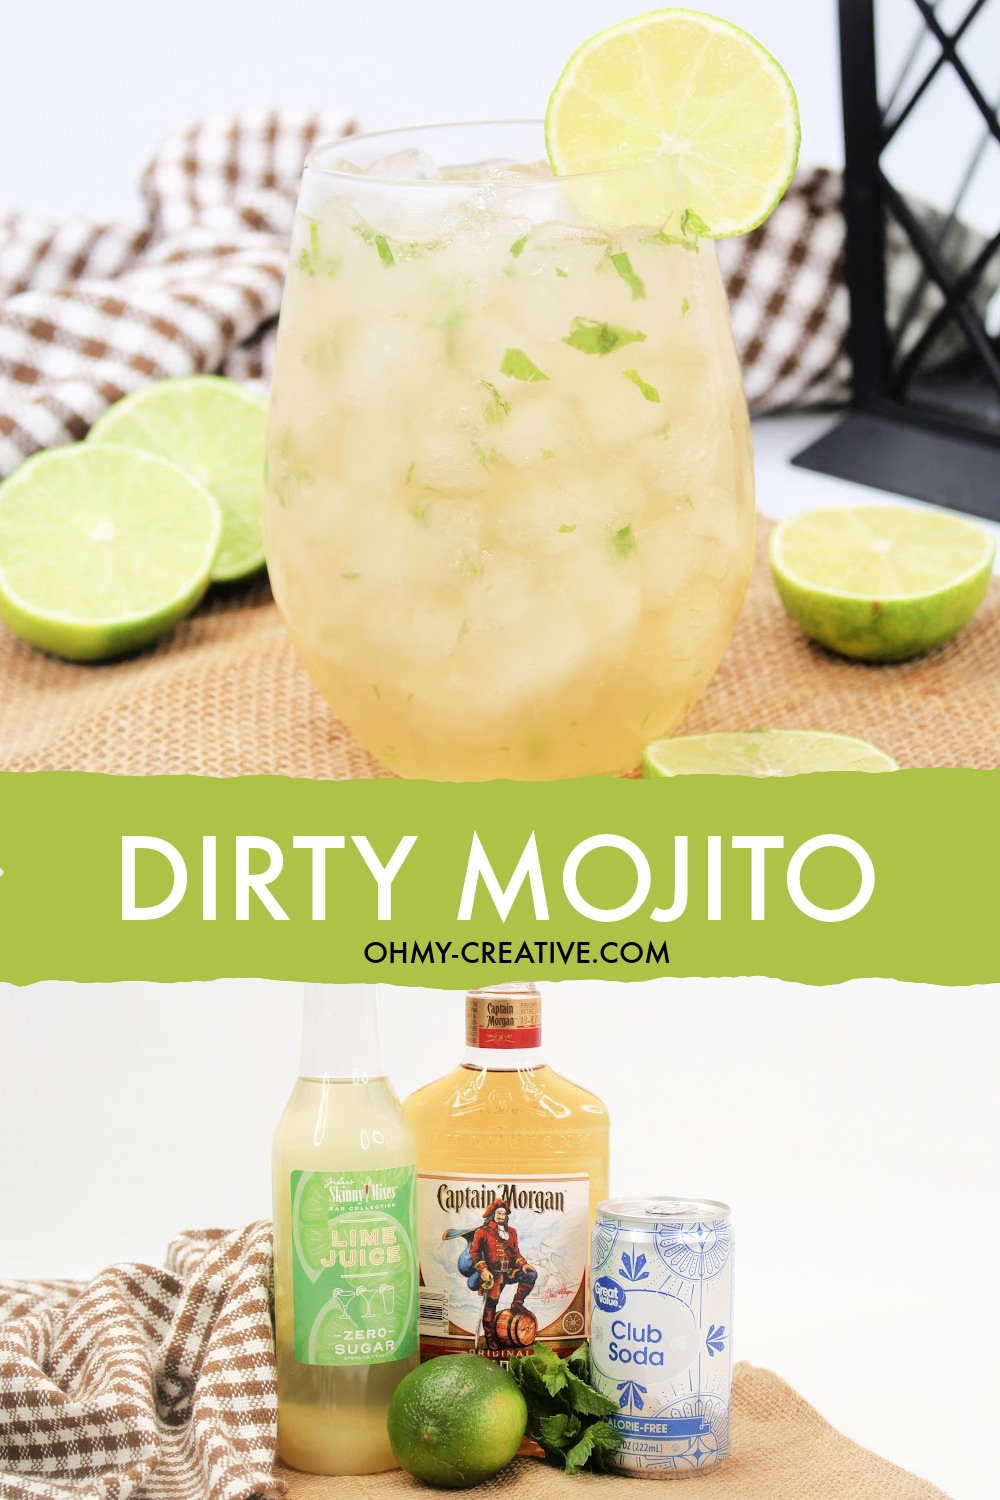 This dirty mojito cocktail is sitting on a burlap background with a black and white checked napkin and a black summer lantern. Garnished include slices of lime. Also at the bottom is an image of the dirty mojito ingredients.